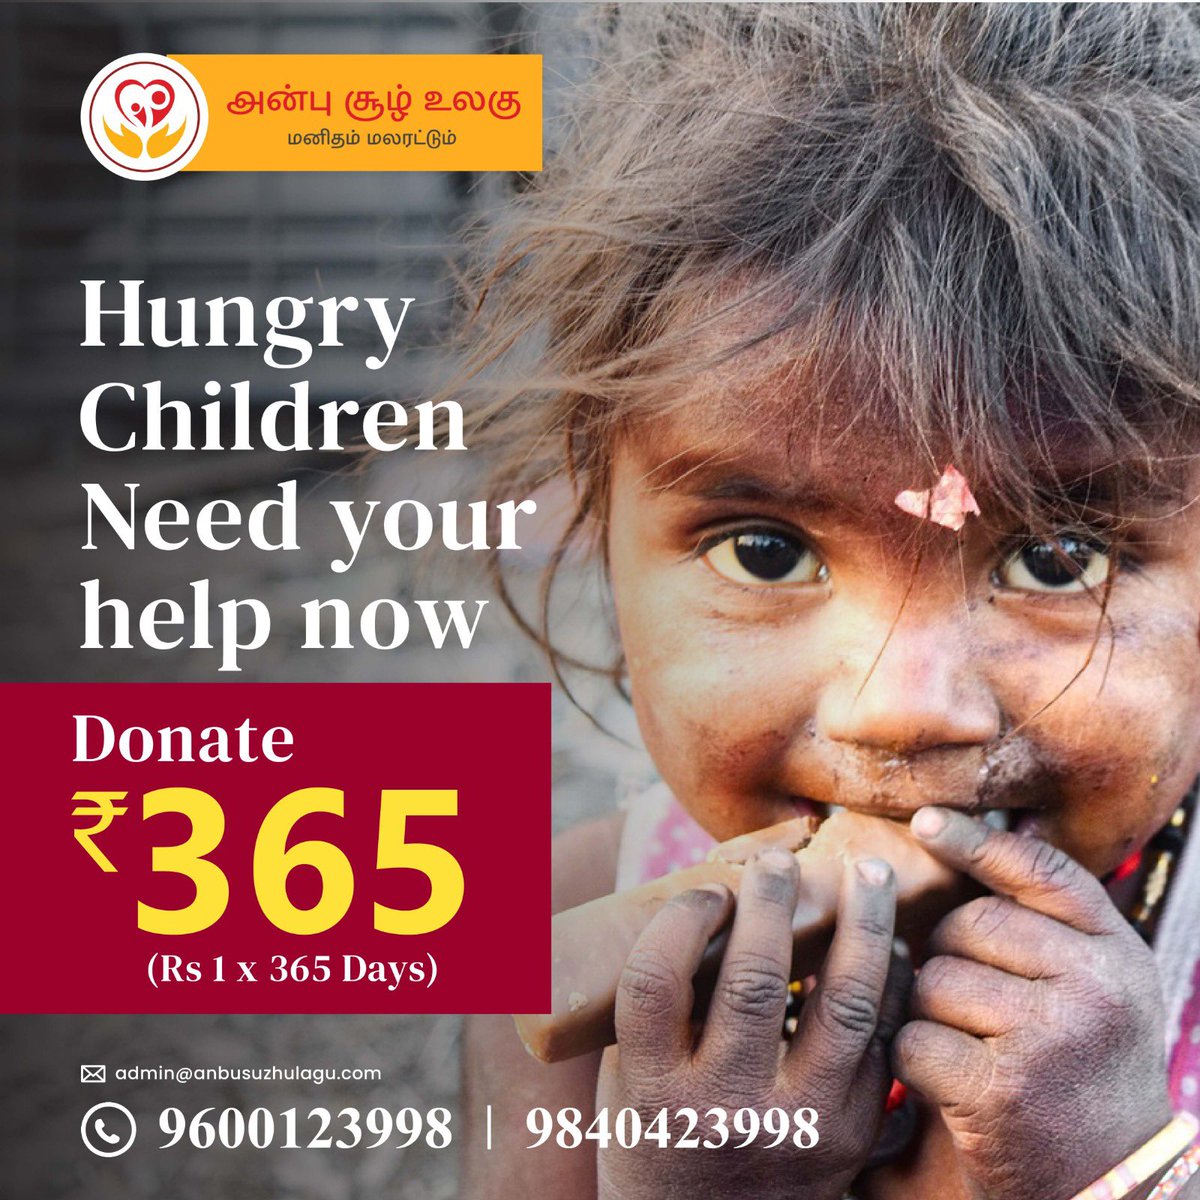 Absolutely, small contributions can accumulate to create significant impacts. Every effort counts, no matter how small it may seem.

Anbu Suzh Ulagu Foundation

#anbusuzhulagu #anbusuzhulagu_thirumangalam #அன்புசூழ்உலகு #foodforlife #feedtheneedy #rupeeaday #hungerfree #fooddrive